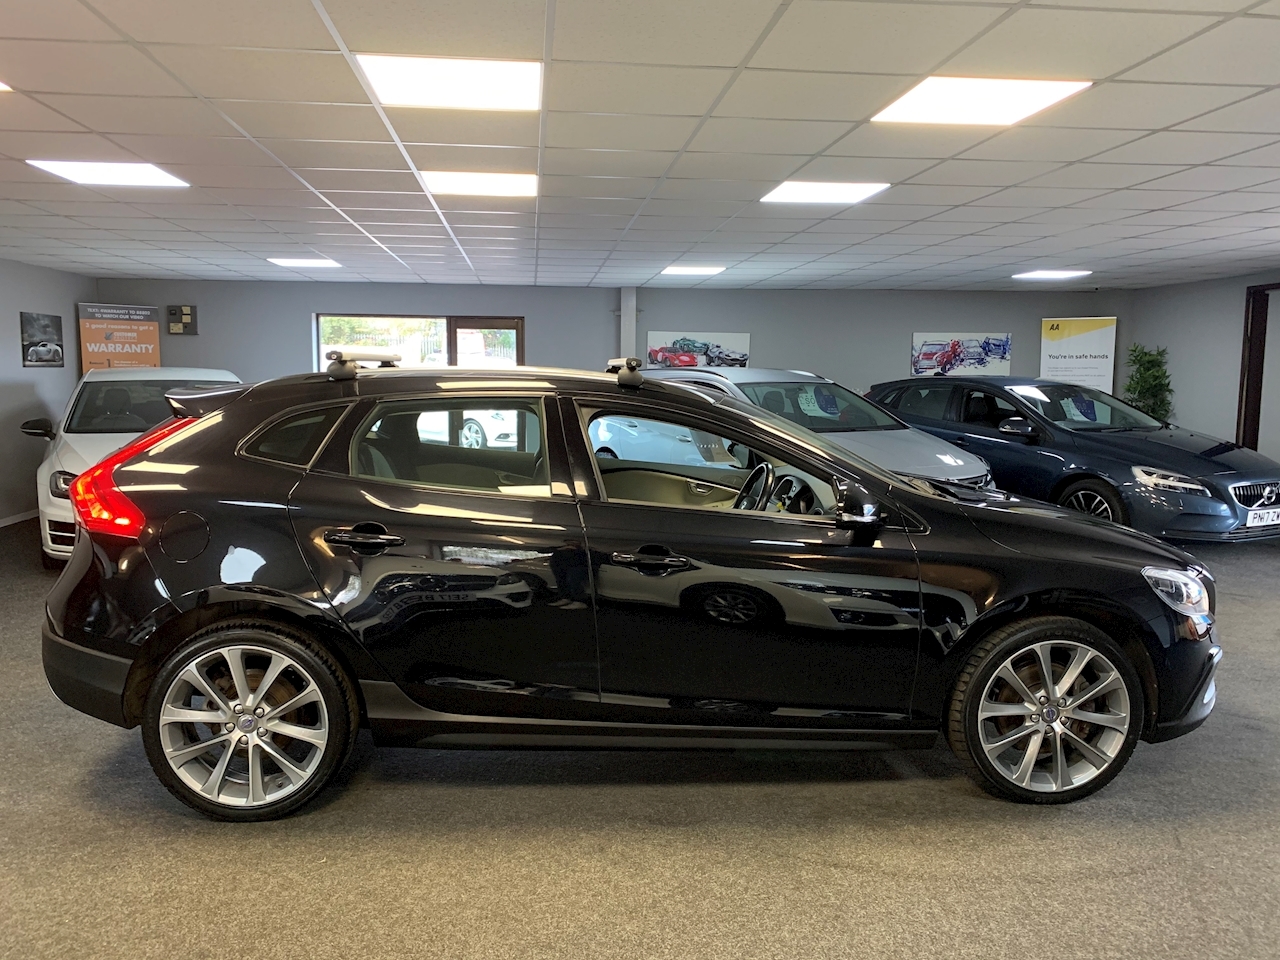 V40 Cross Country Lux Nav 2.0 5dr Cross Country Geartronic Diesel